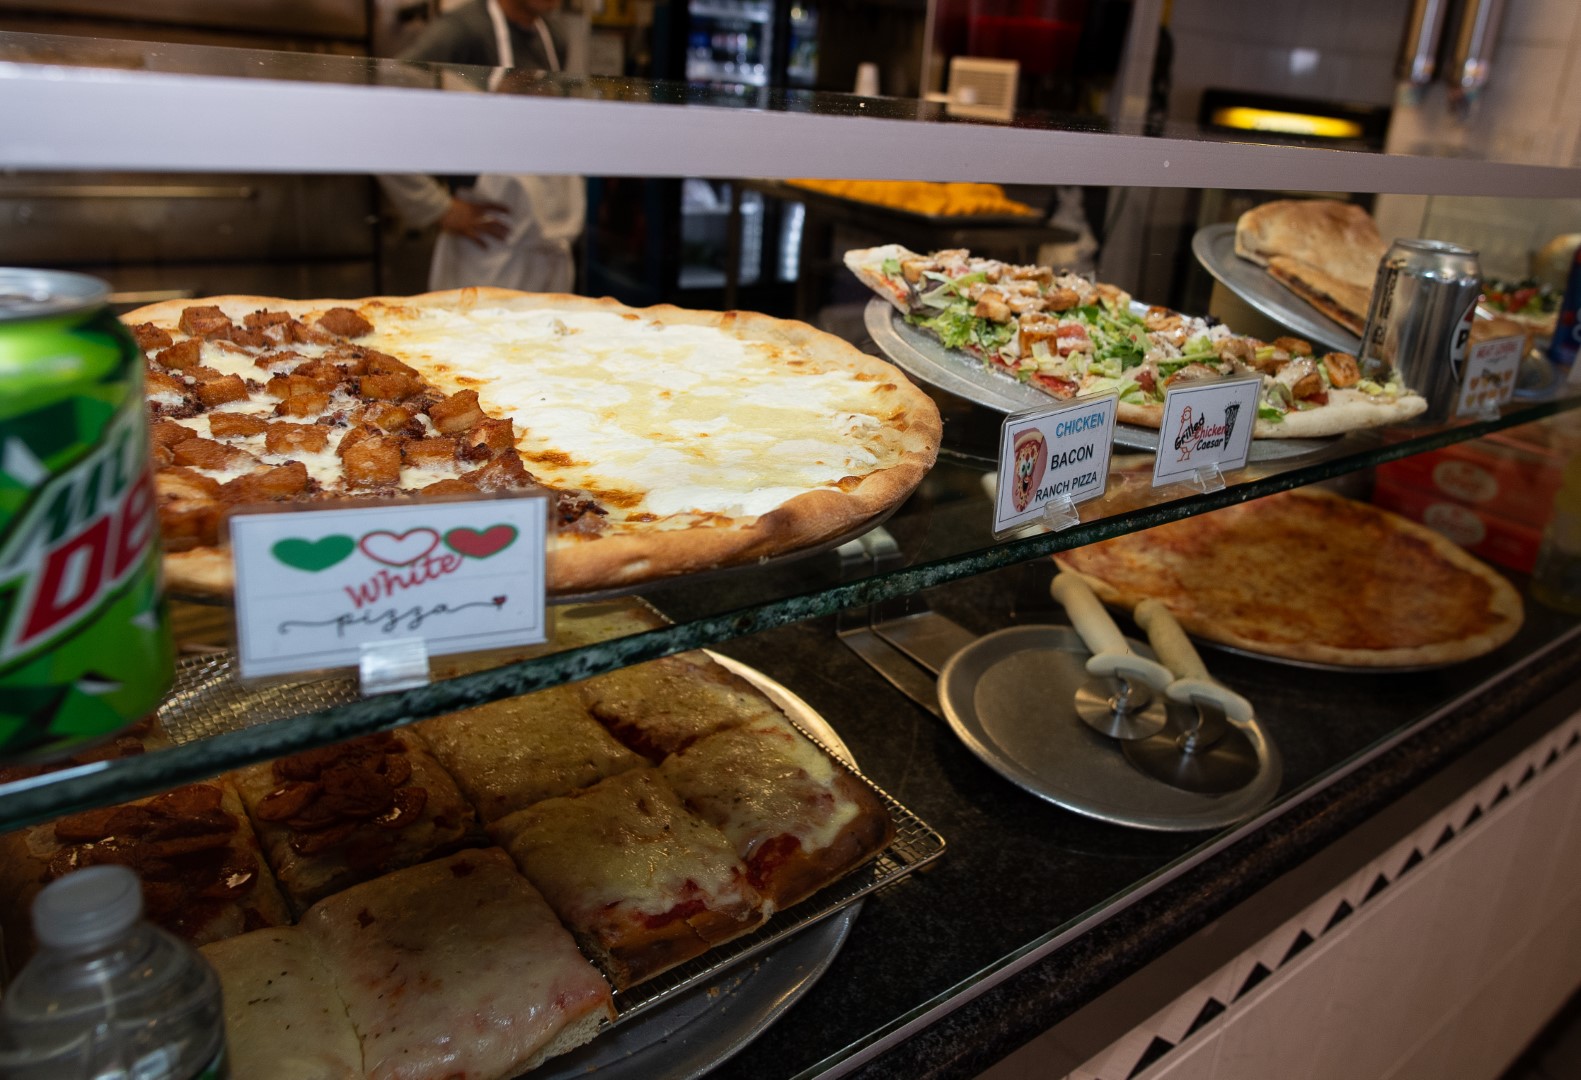 Display of various pizza slices in a pizza shop, with labels like "white pizza" and "bacon chicken ranch," visible through a glass counter, with a soda can on the side.